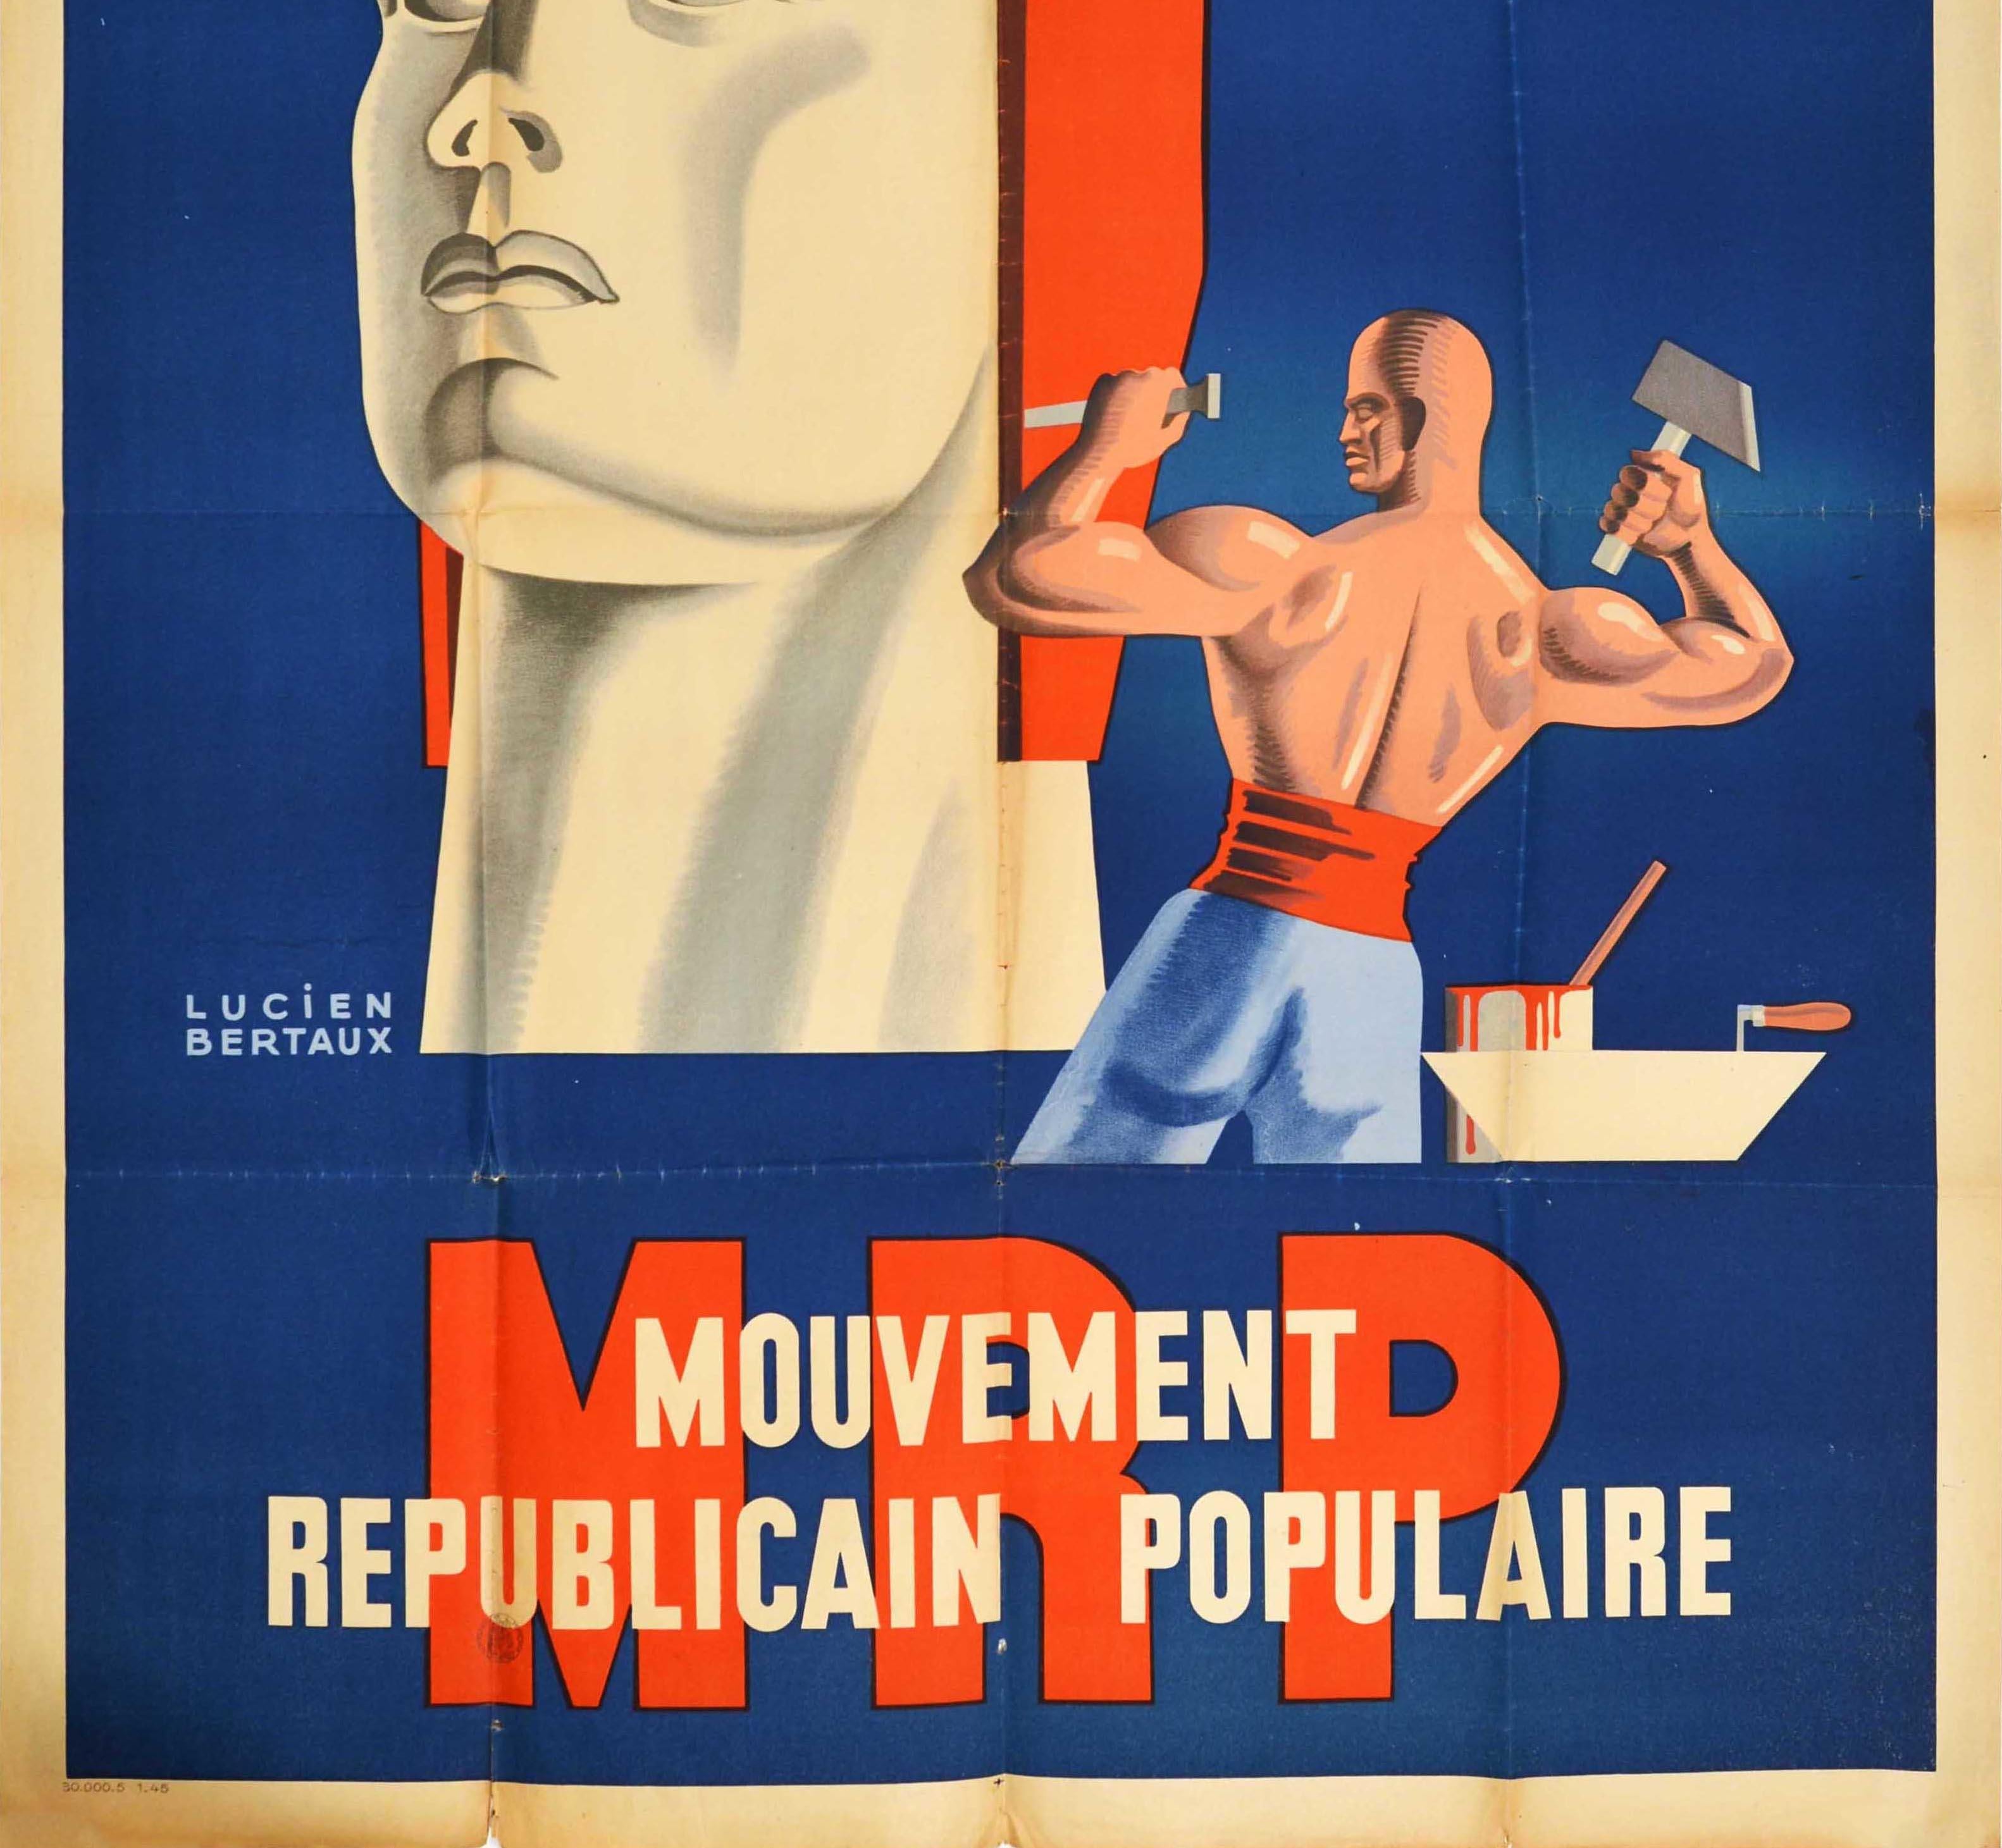 vintage election posters